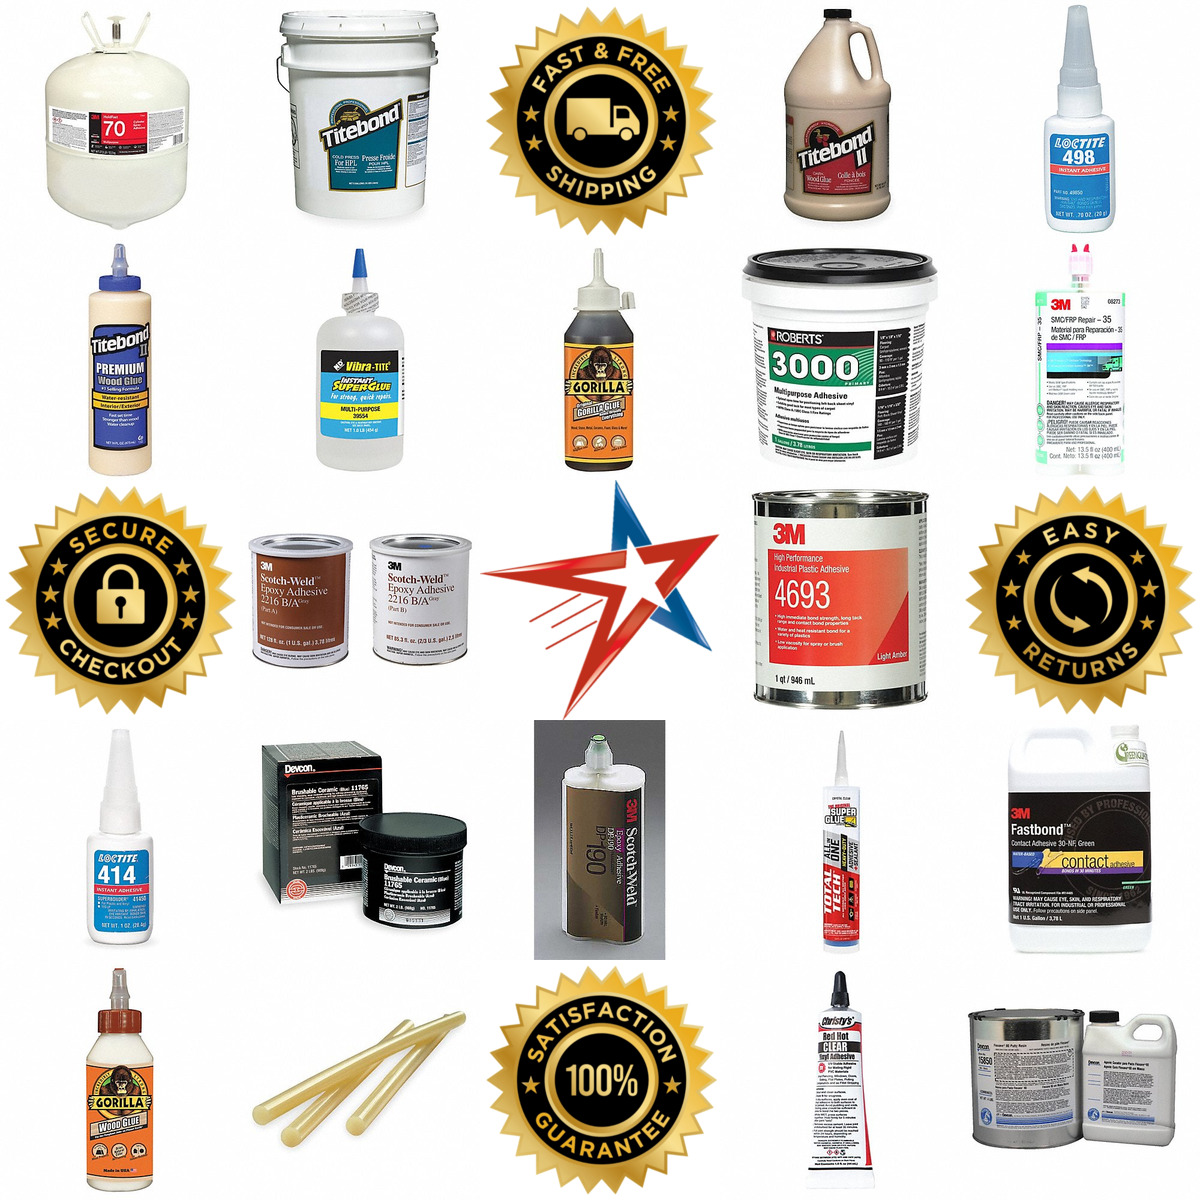 A selection of Adhesives and Glues products on GoVets